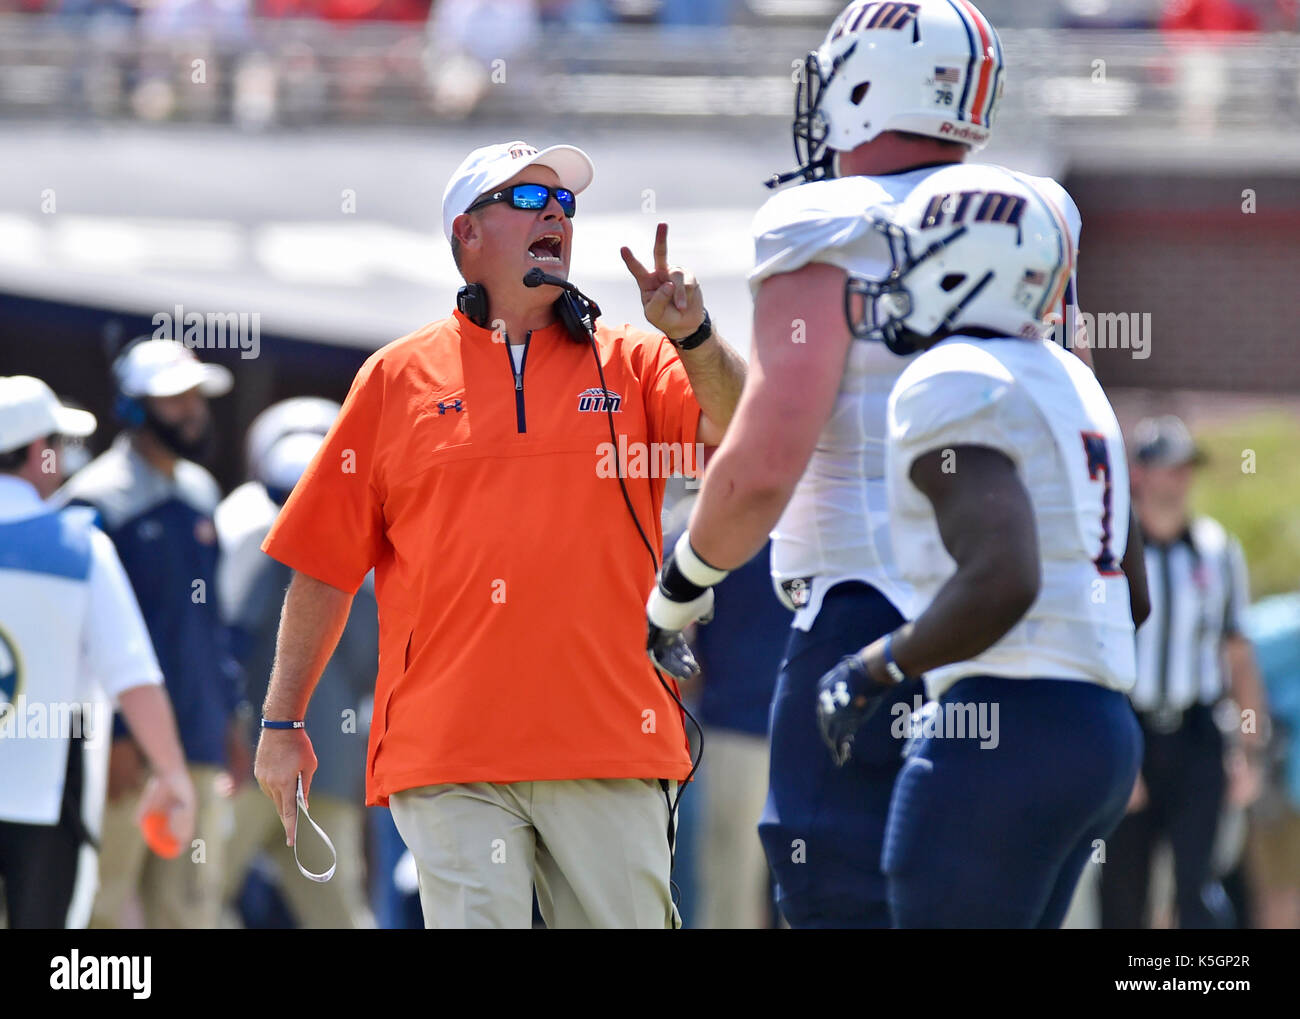 Oxford, MS, USA. 9th Sep, 2017. Tennessee-Martin coach Jason Simpson talks to one of his players during a third quarter timeout of a NCAA college football game against Mississippi at Vaught-Hemmingway Stadium in Oxford, MS. Mississippi won 45-23. Austin McAfee/CSM/Alamy Live News Stock Photo